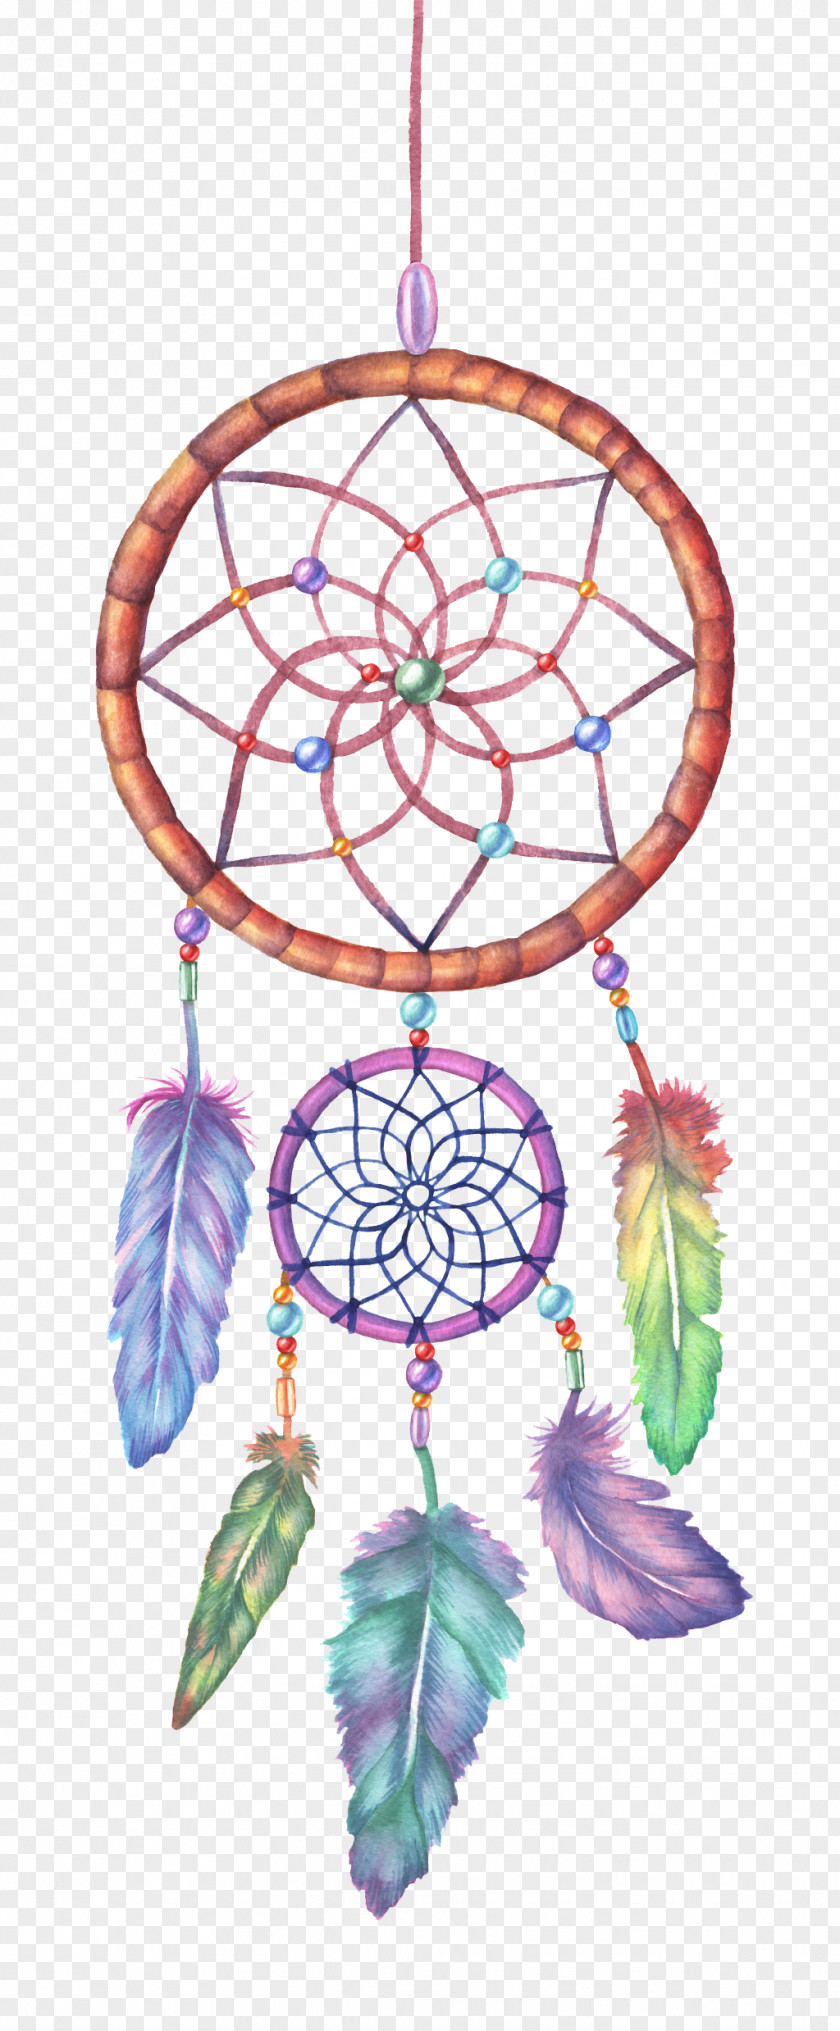 Color Dreamcatcher Watercolor Painting Drawing Illustration PNG